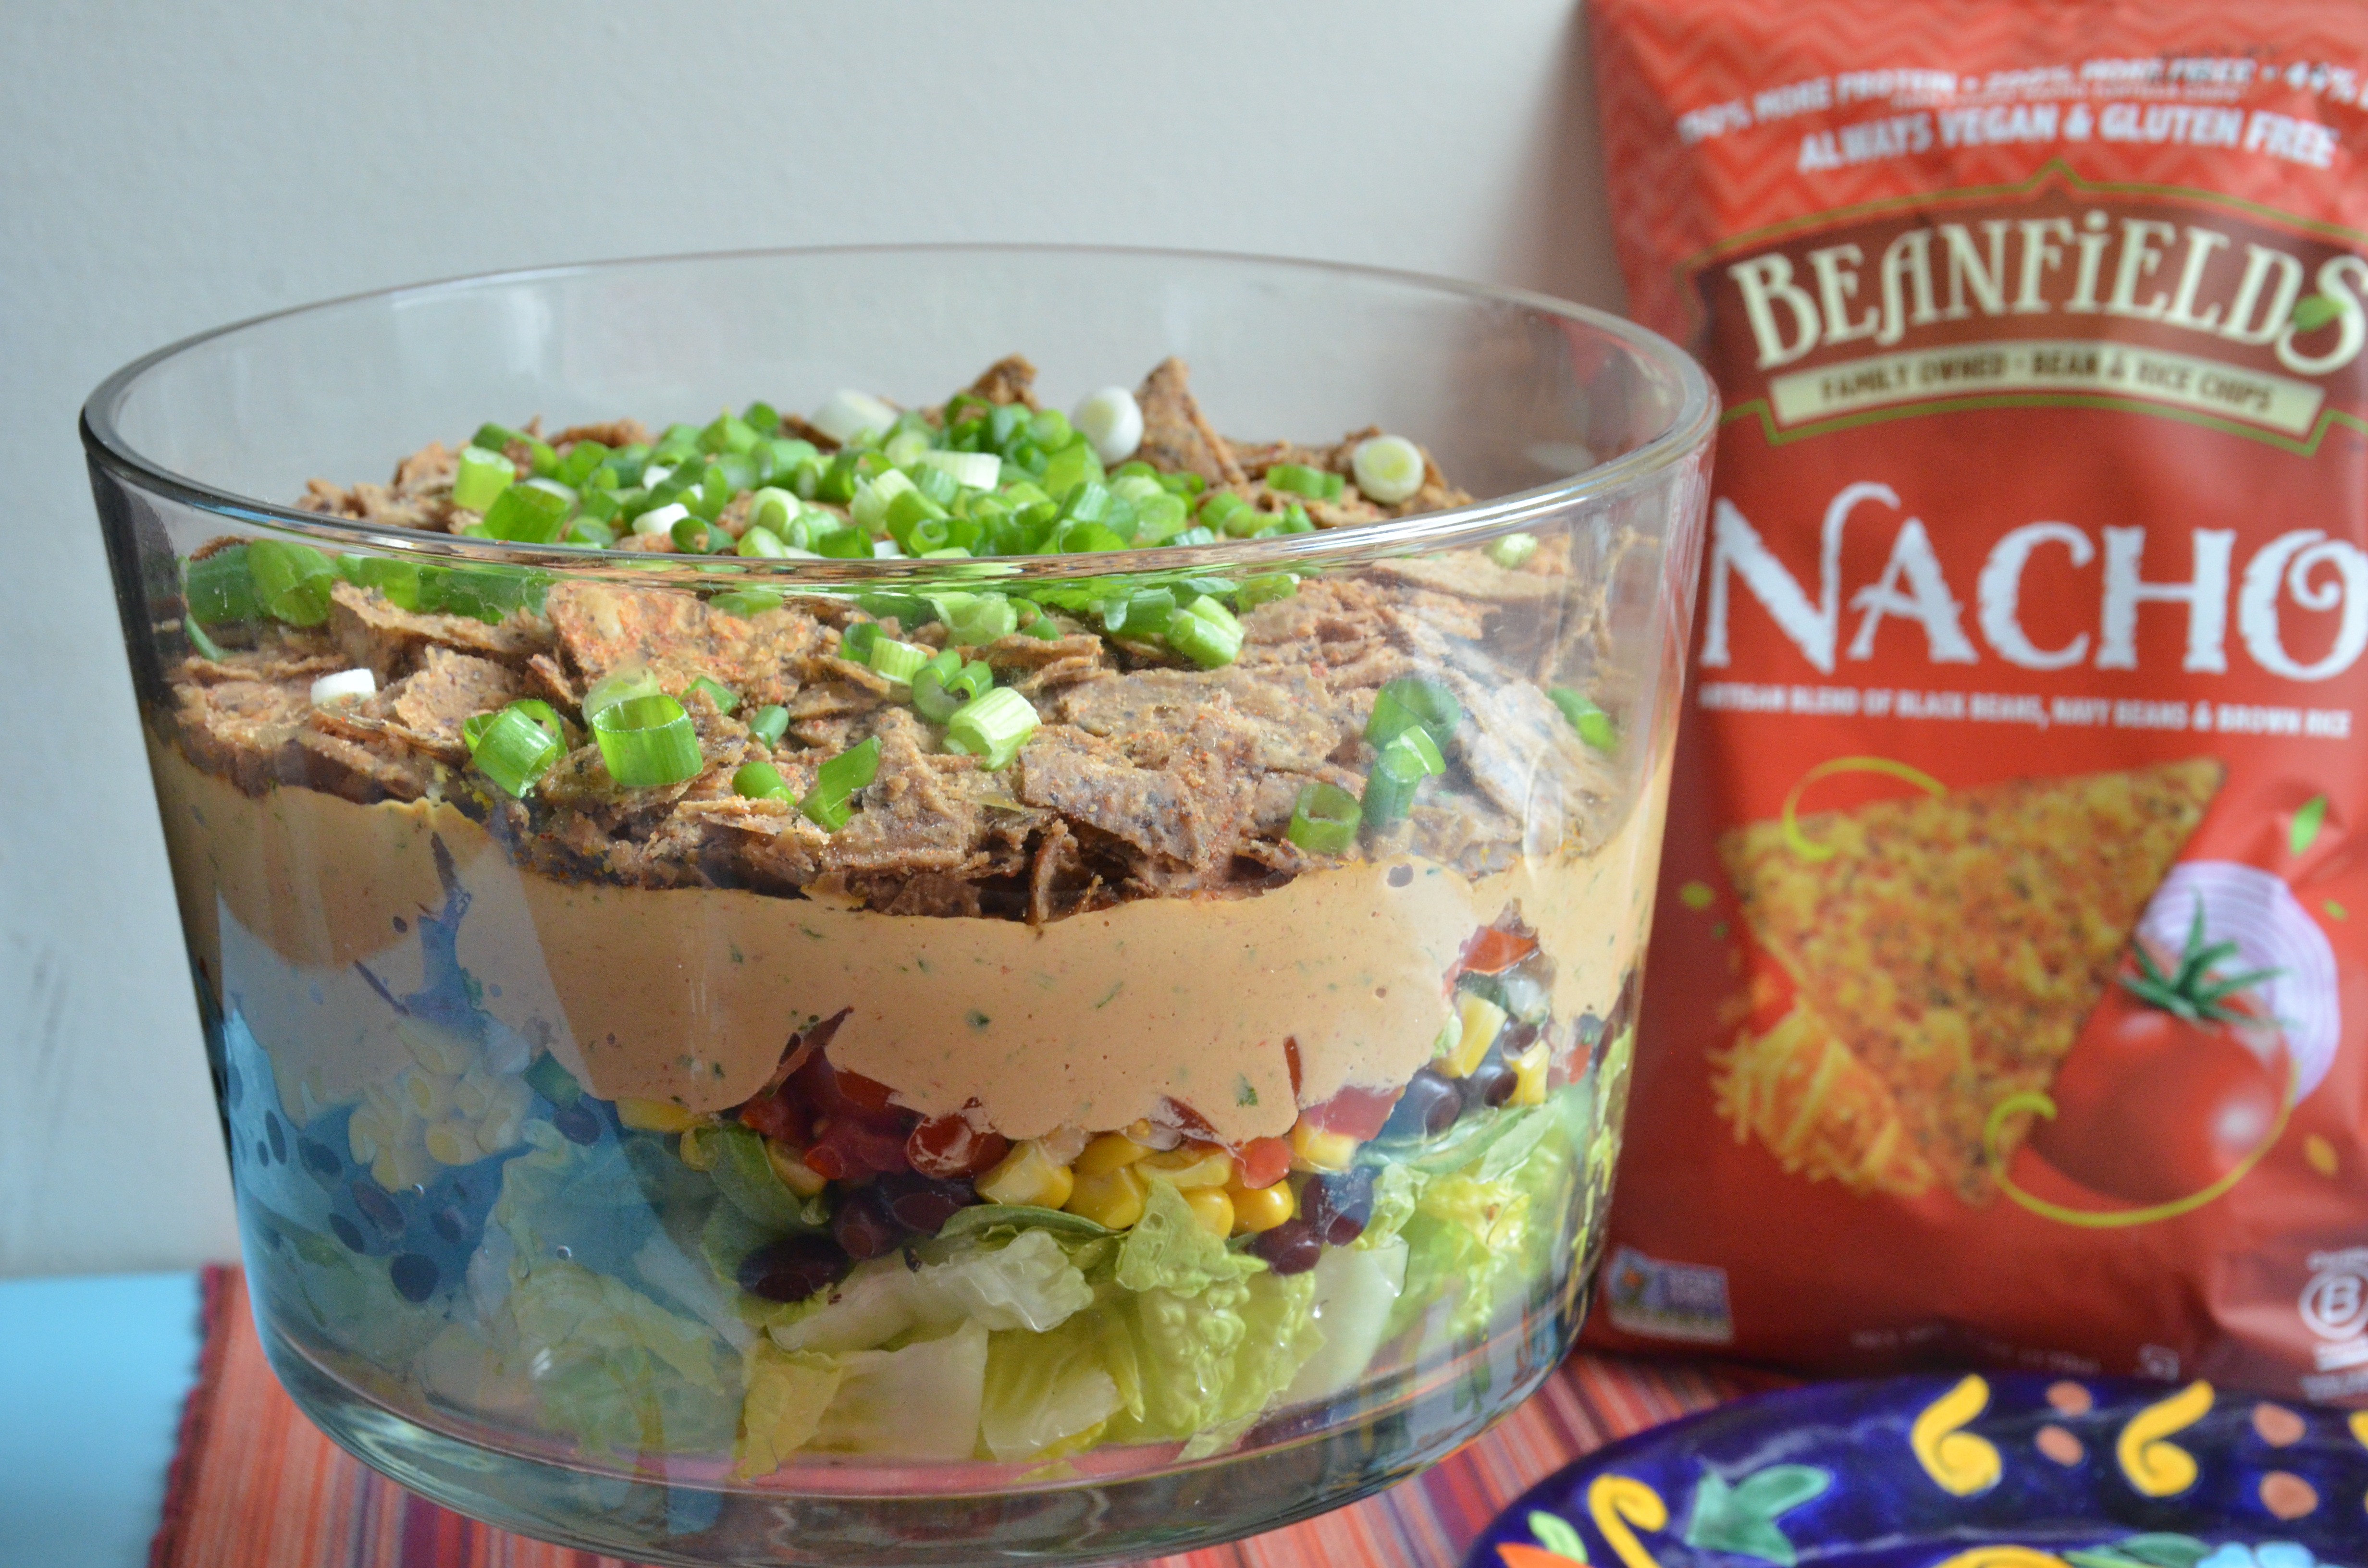 Layered Taco Salad Featuring Beanfields Nacho Chips